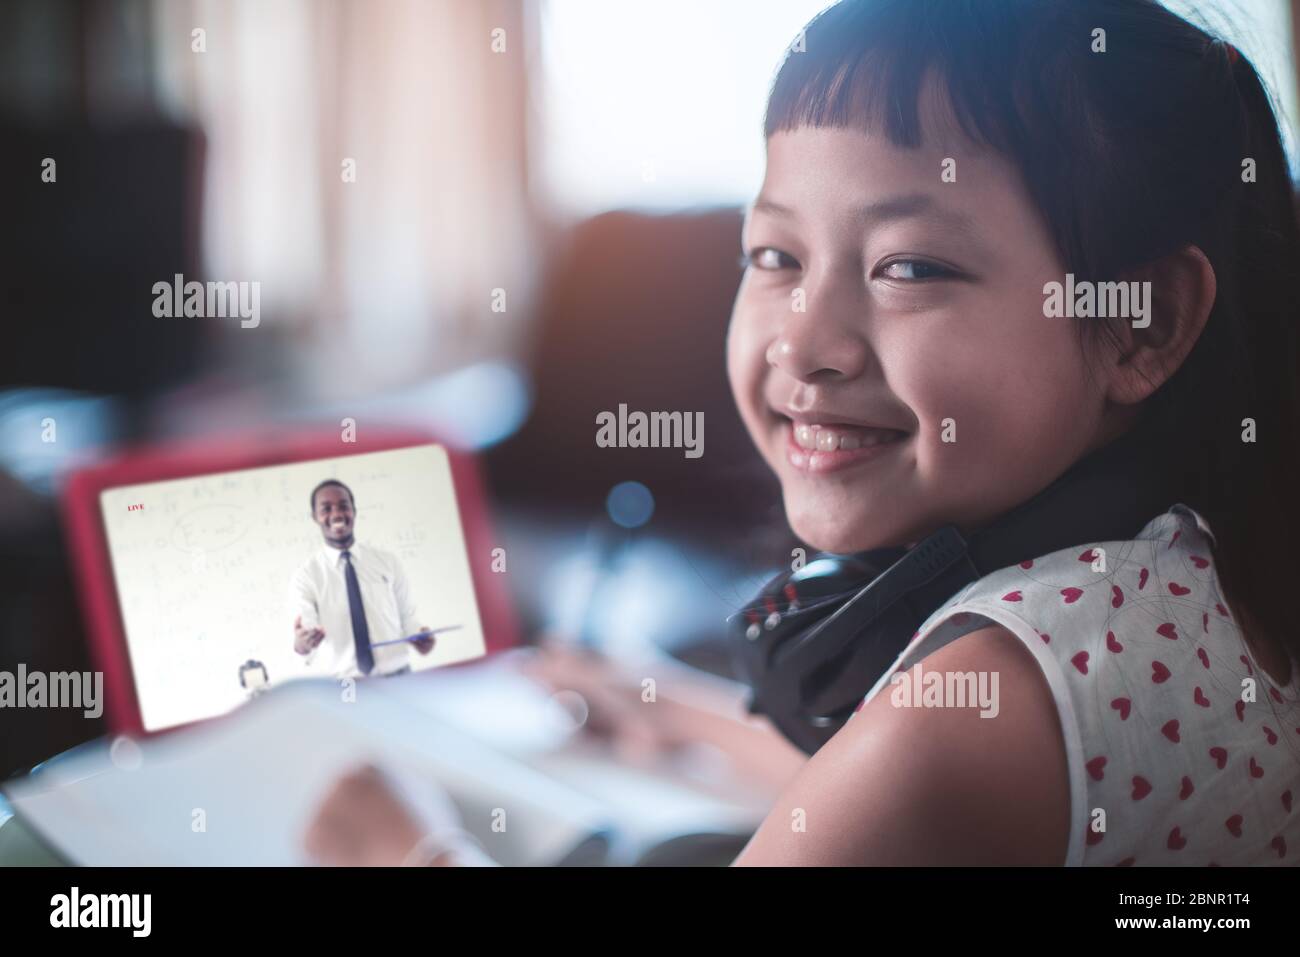 Little child girl learning on laptop at home,Social distance during quarantine, Online education concept Stock Photo